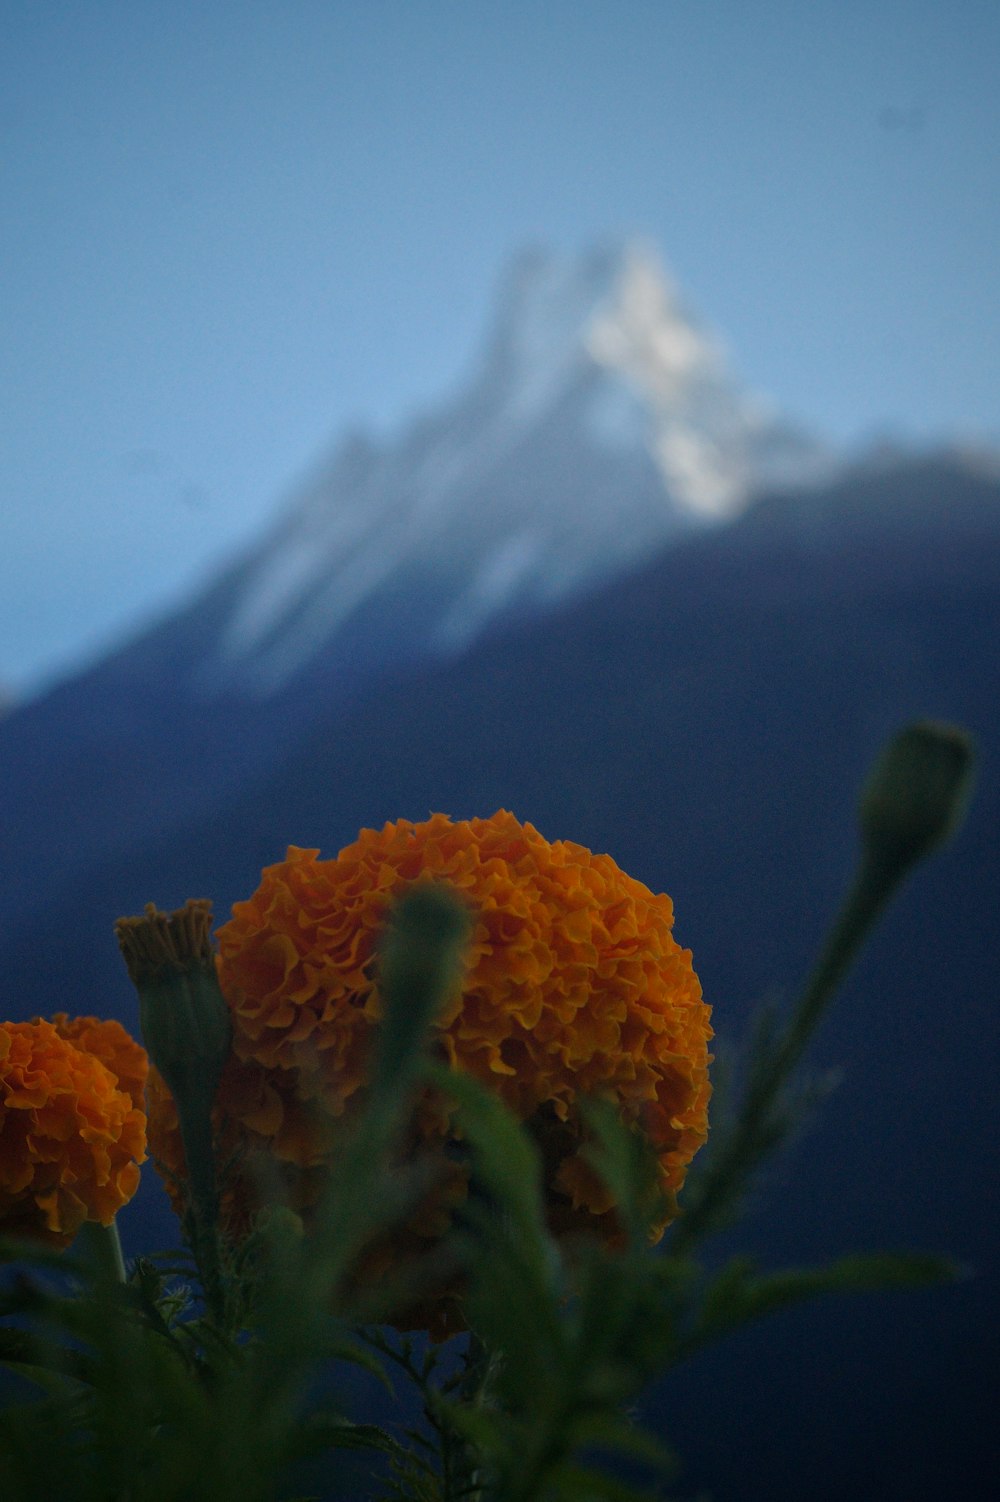 a close up of a flower with a mountain in the background